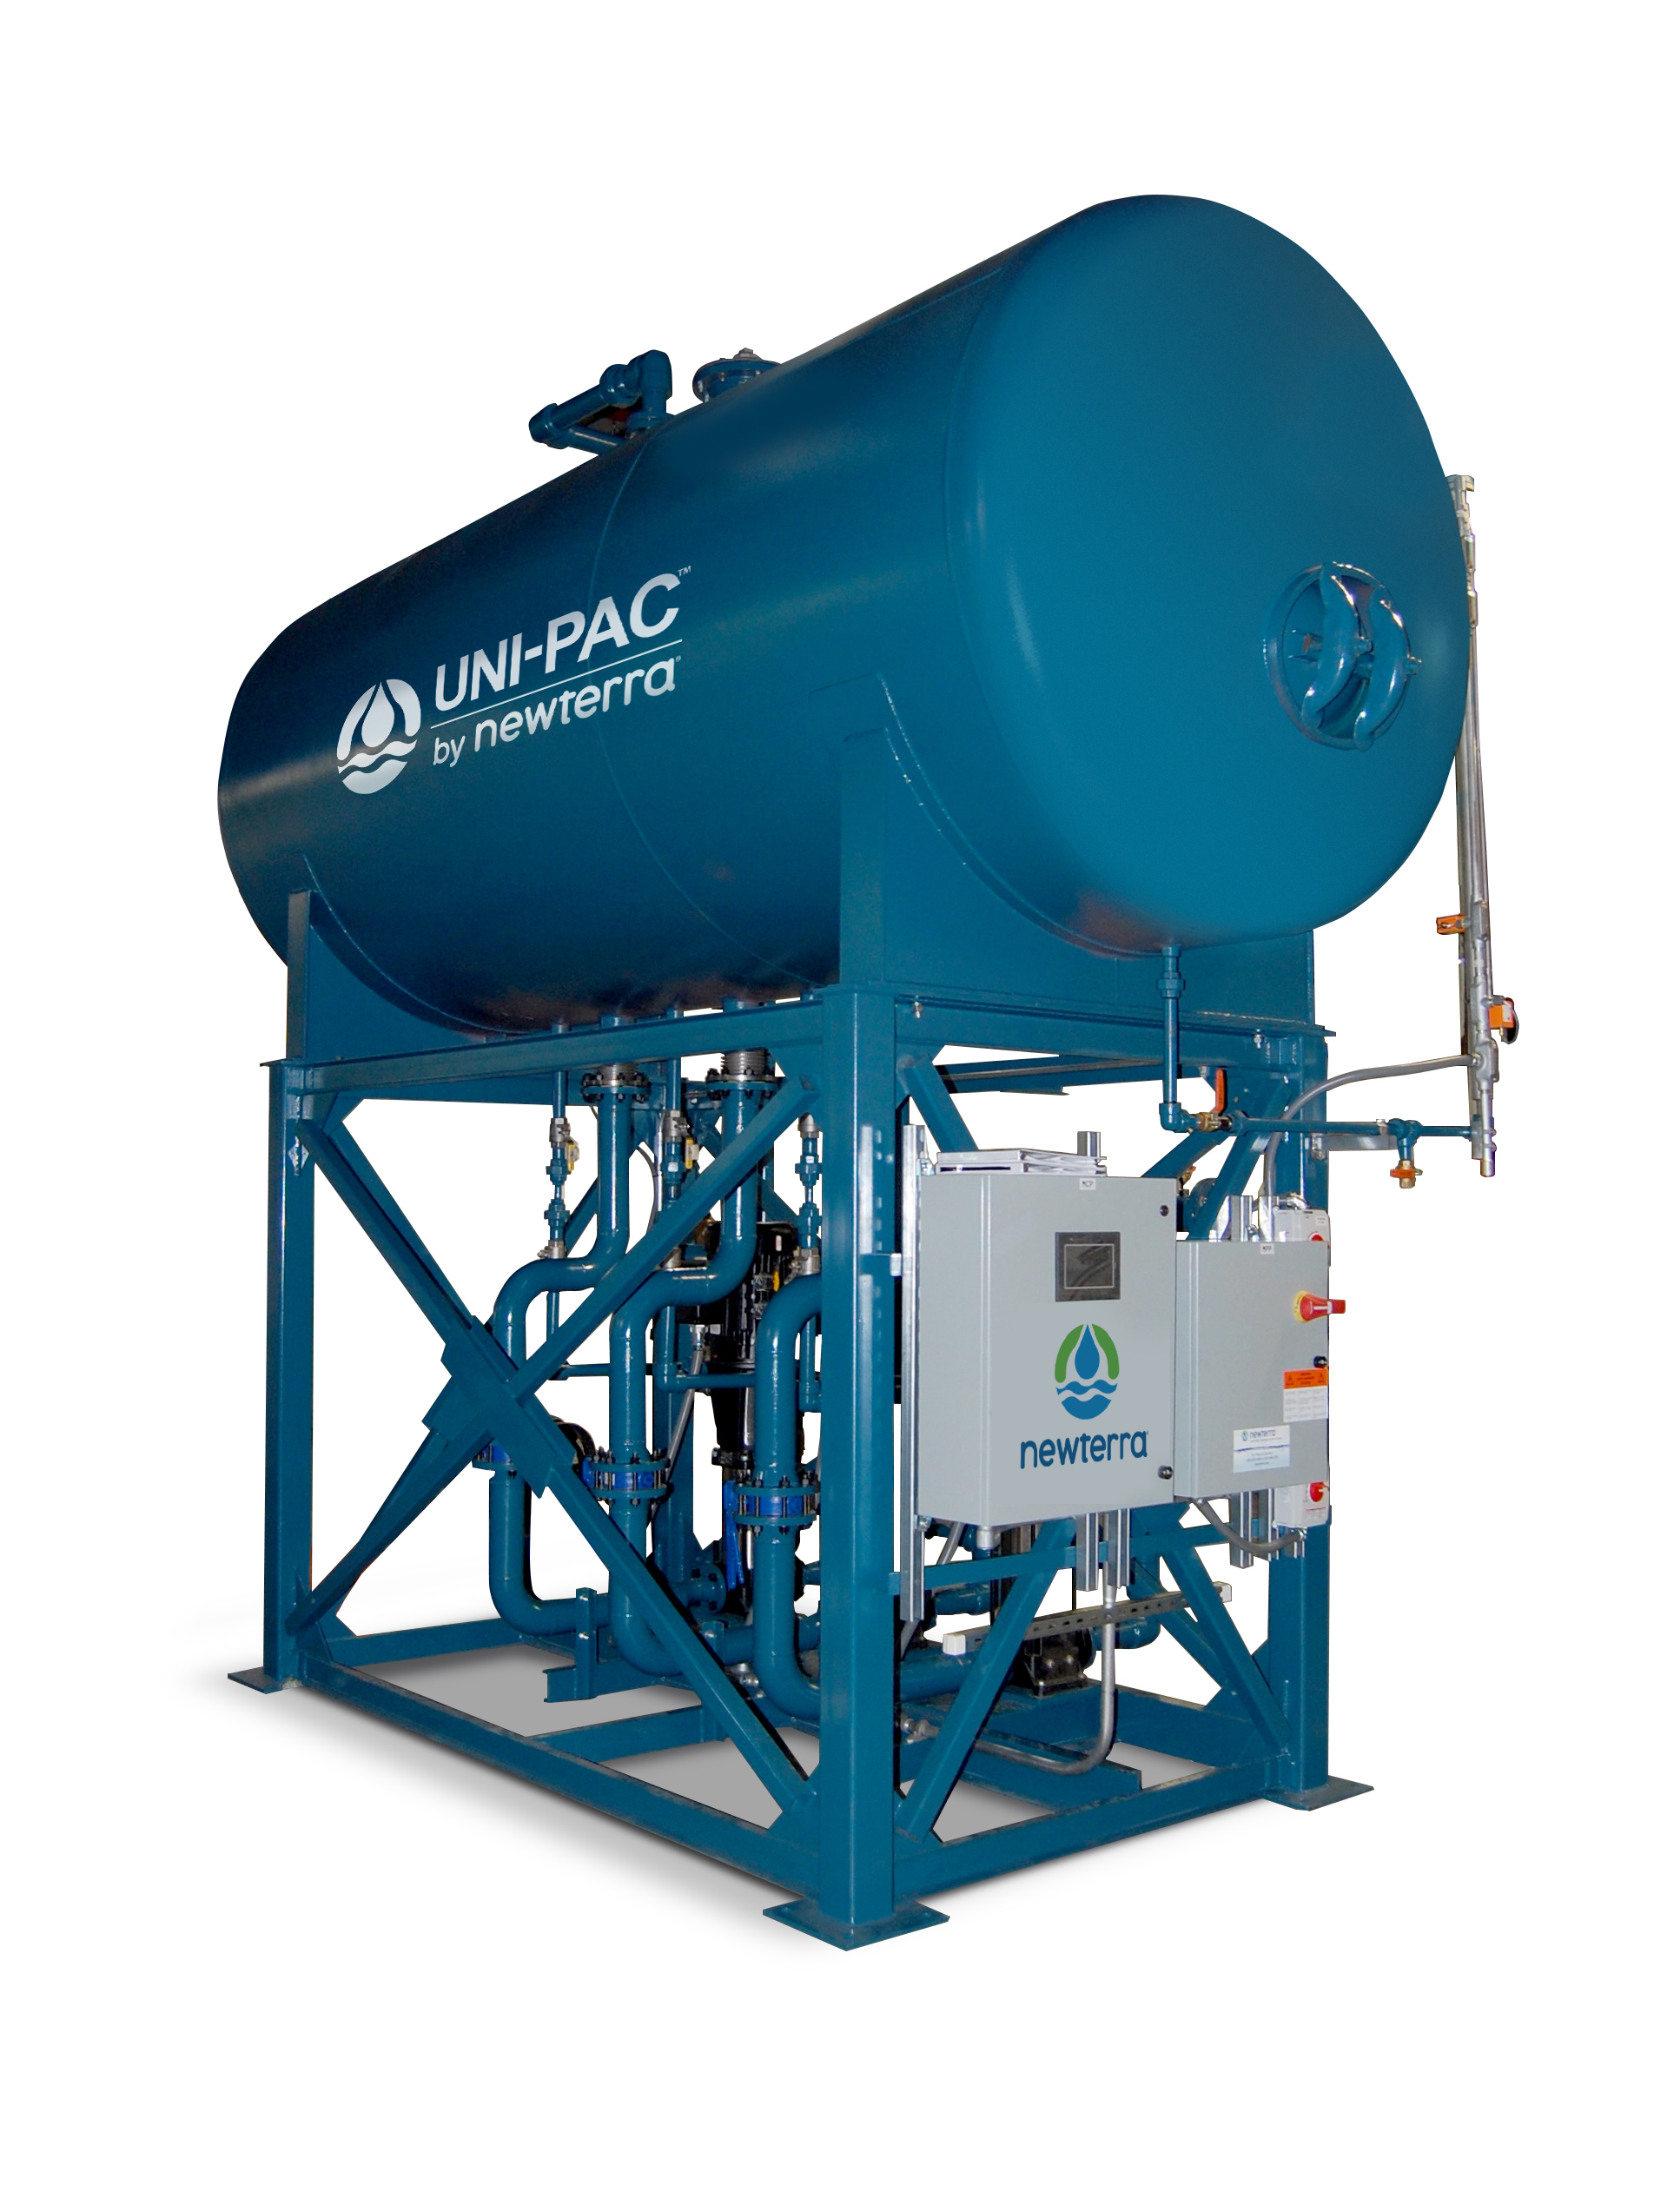 UNI-PAC Packaged Deaerator